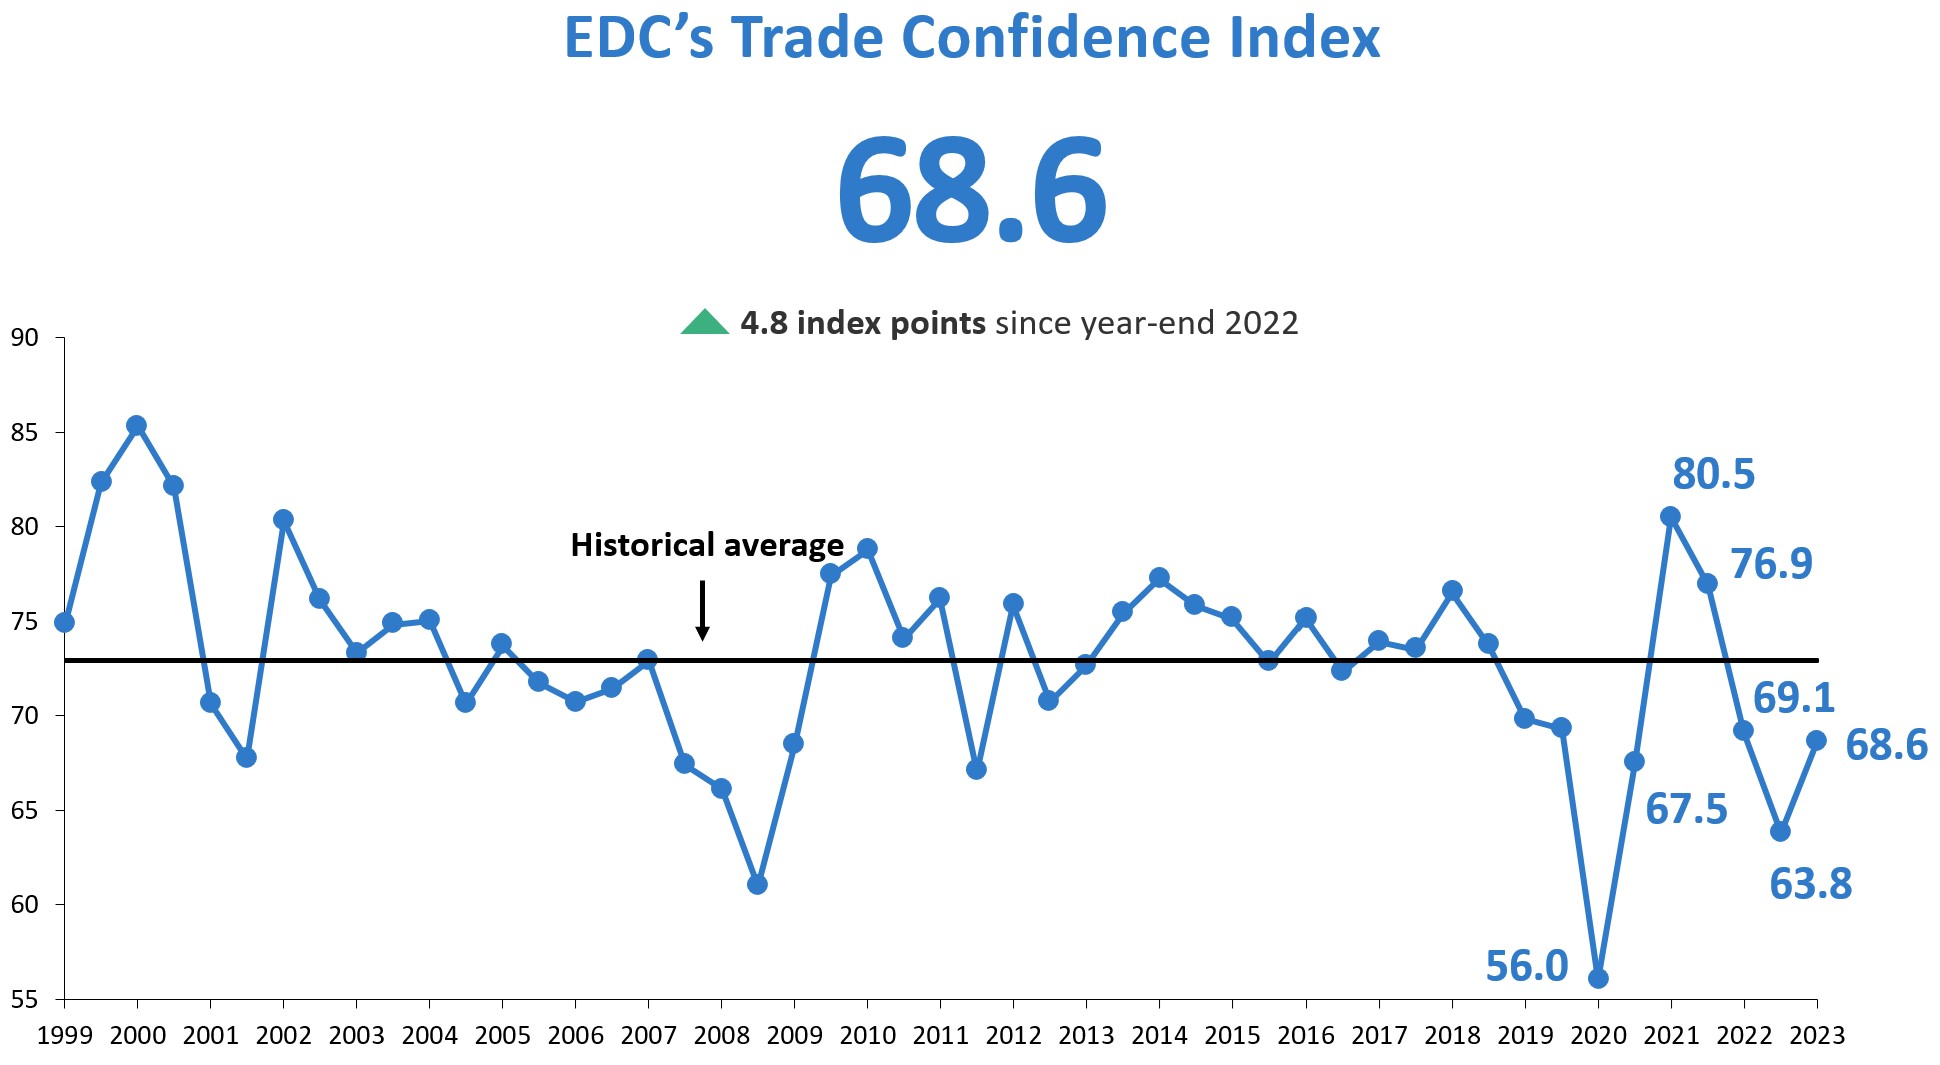 Trade confidence is at 63.8